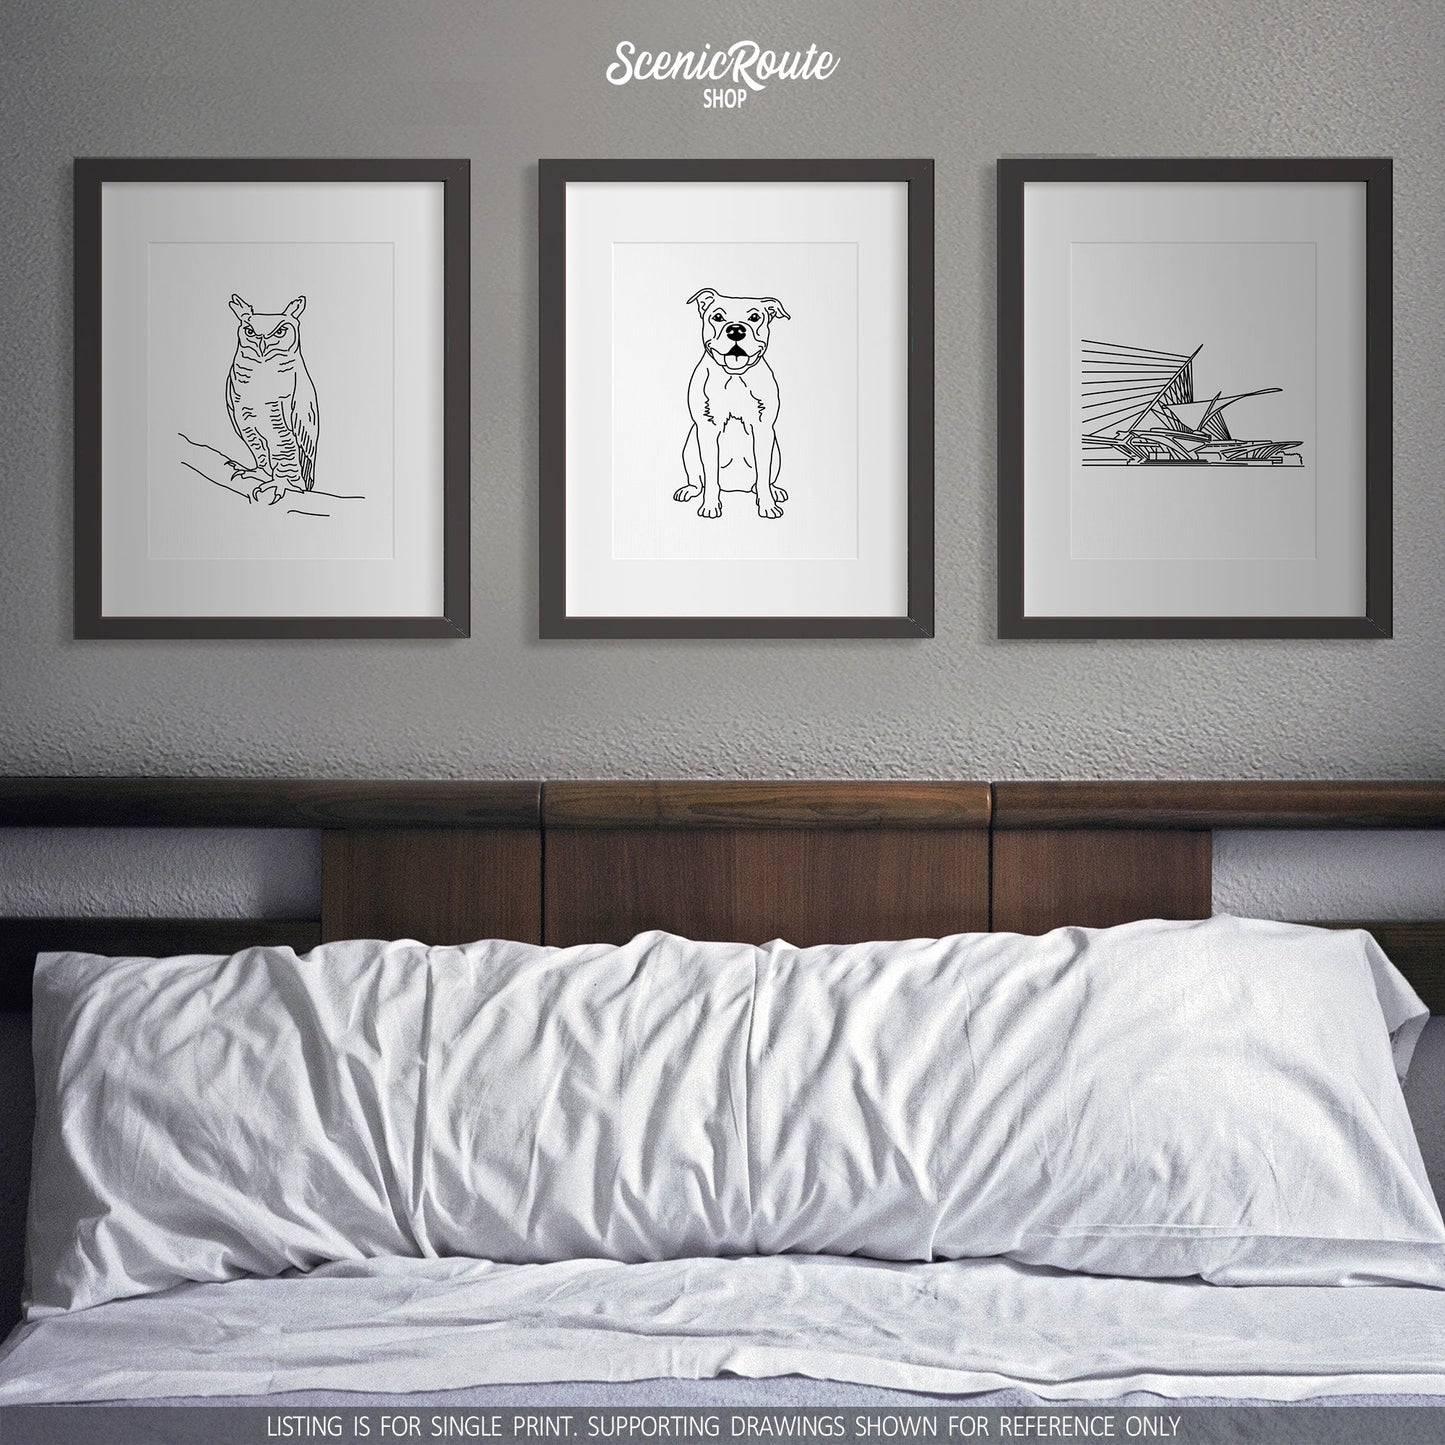 A group of three framed drawings on a gray wall above a bed. The line art drawings include an Owl, a Pitbull dog, and the Milwaukee Museum of Art